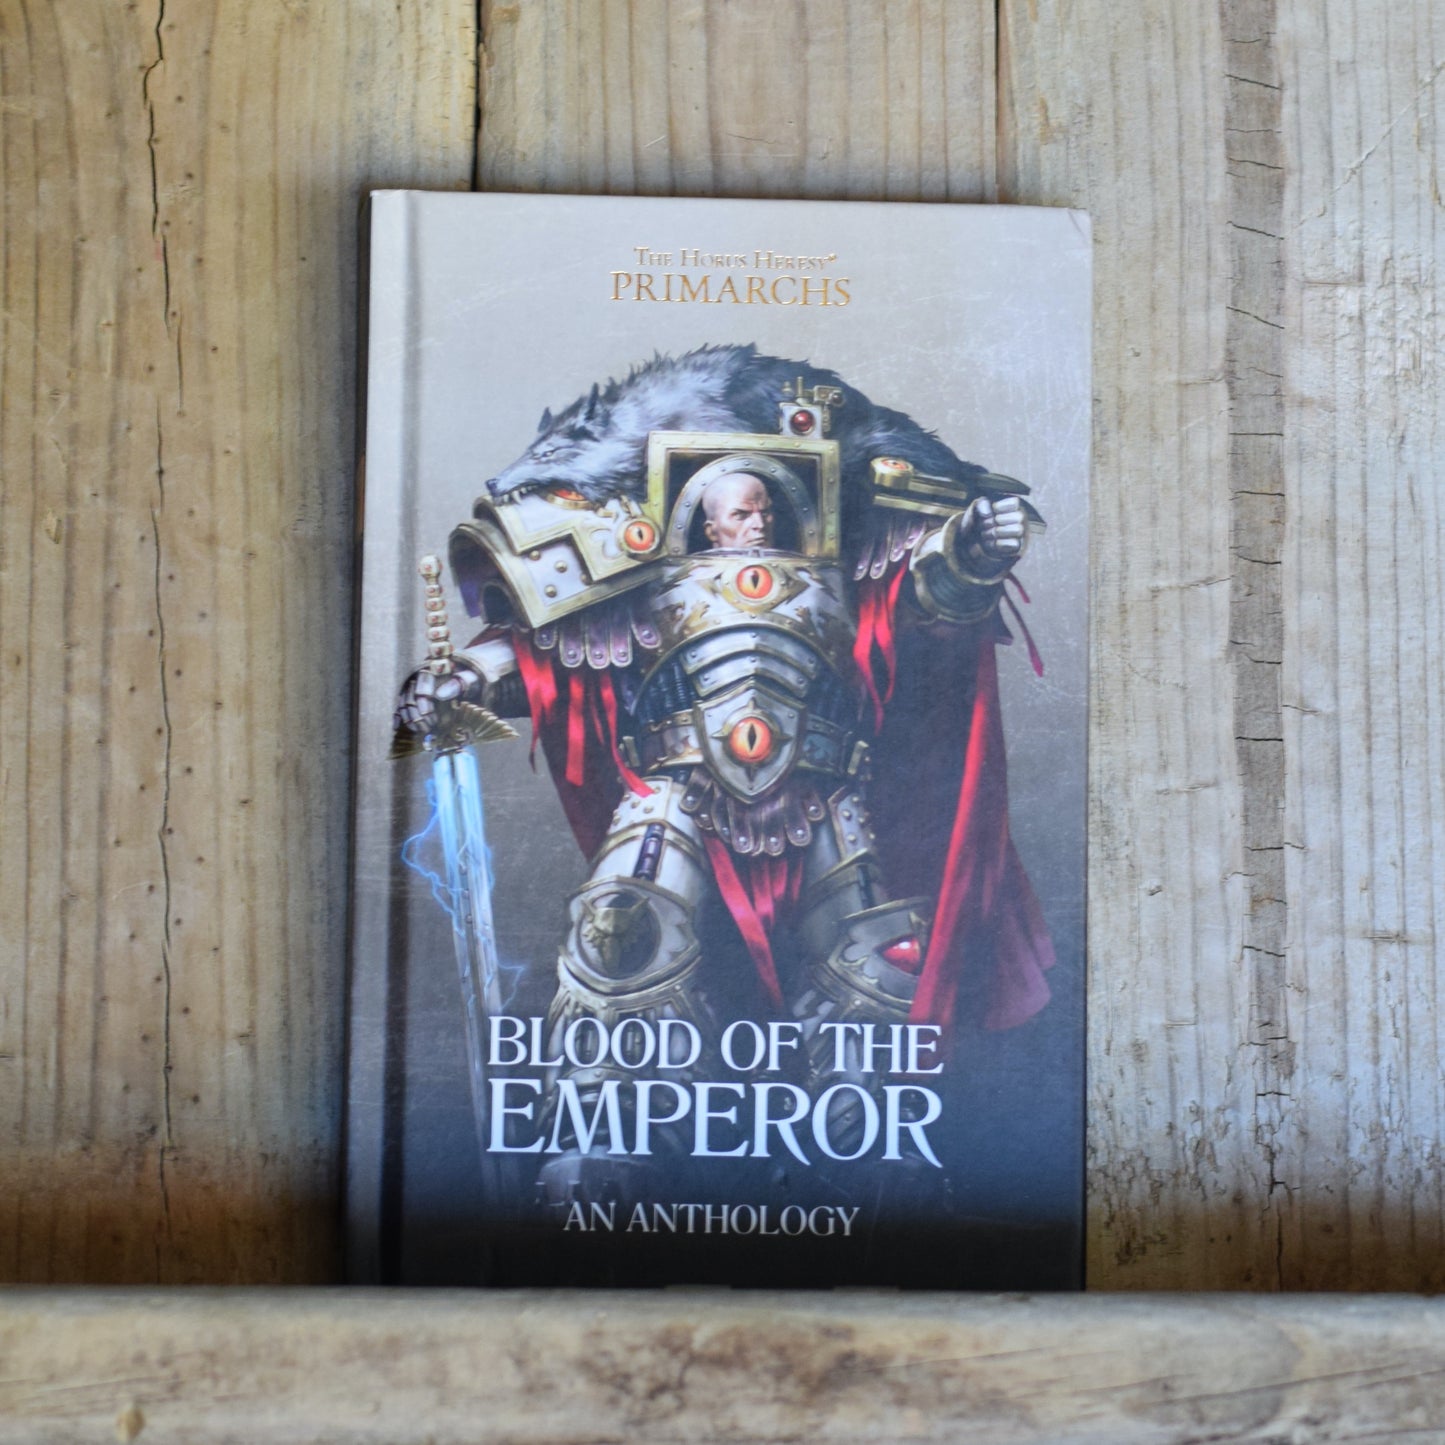 Sci-fi Hardback: The Horus Heresy Primarchs: Blood of the Emperor FIRST PRINTING